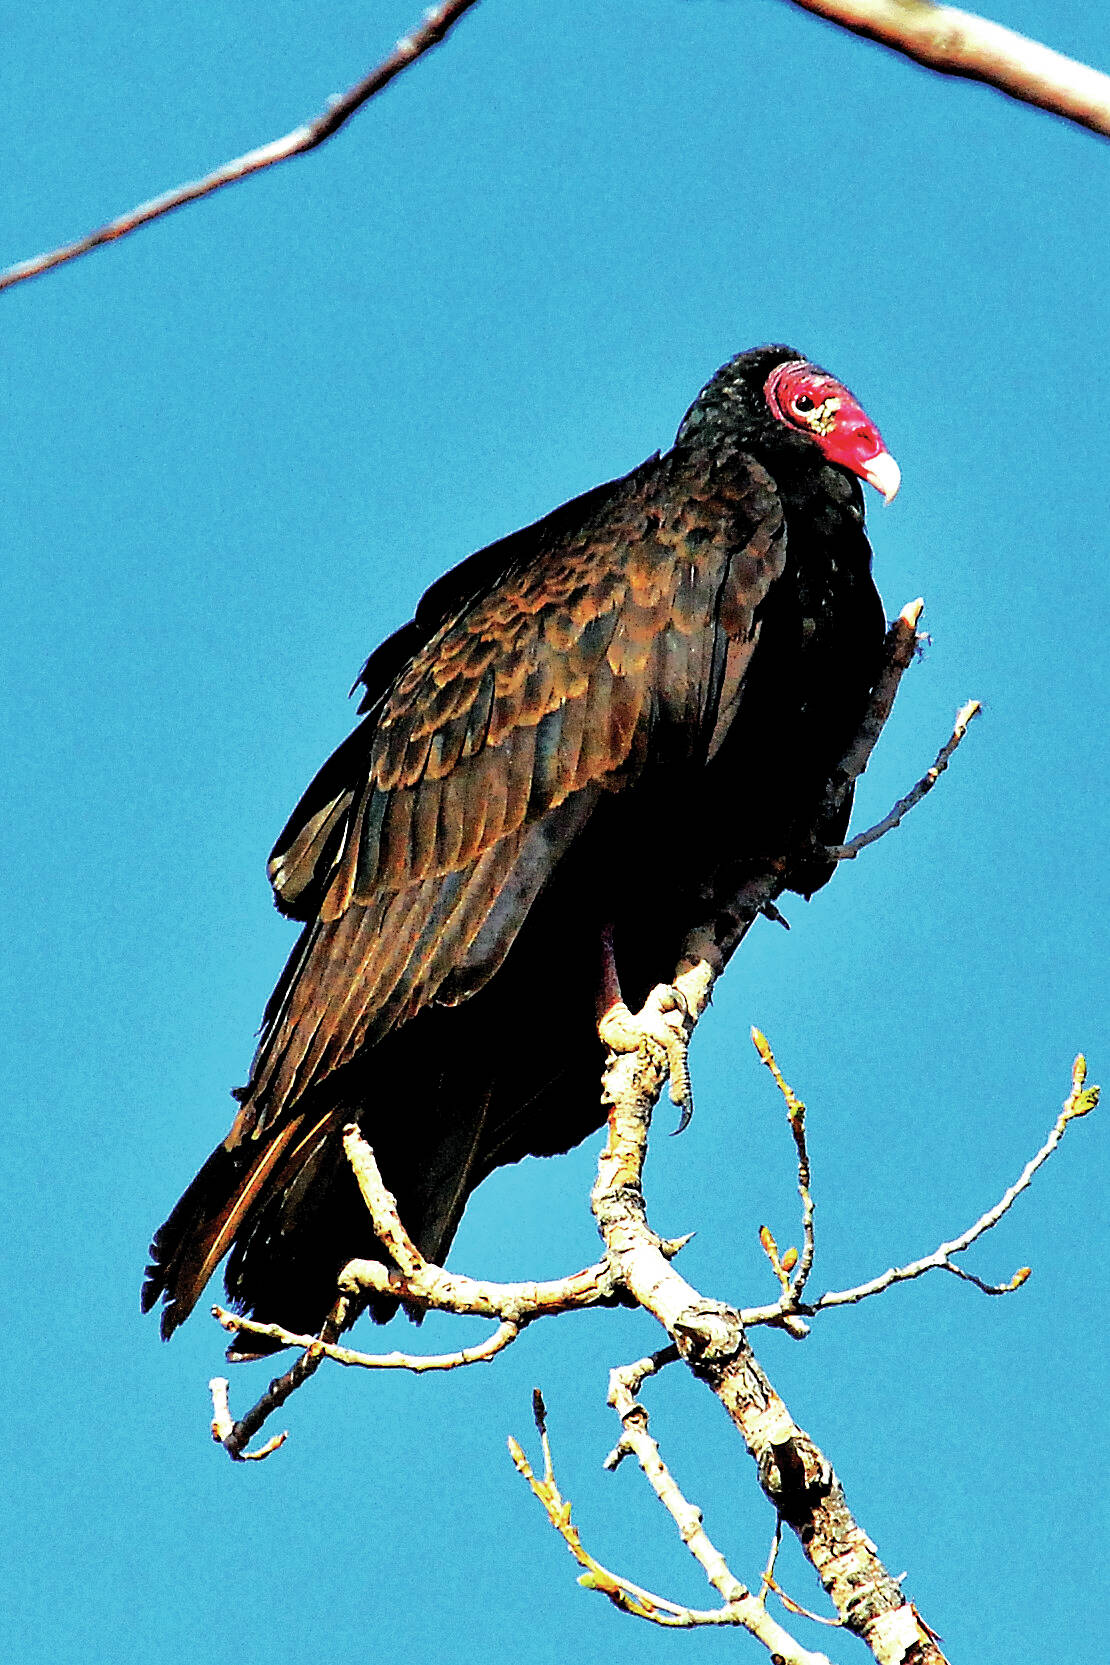 Turkey vulture populations have increased in Washington state.